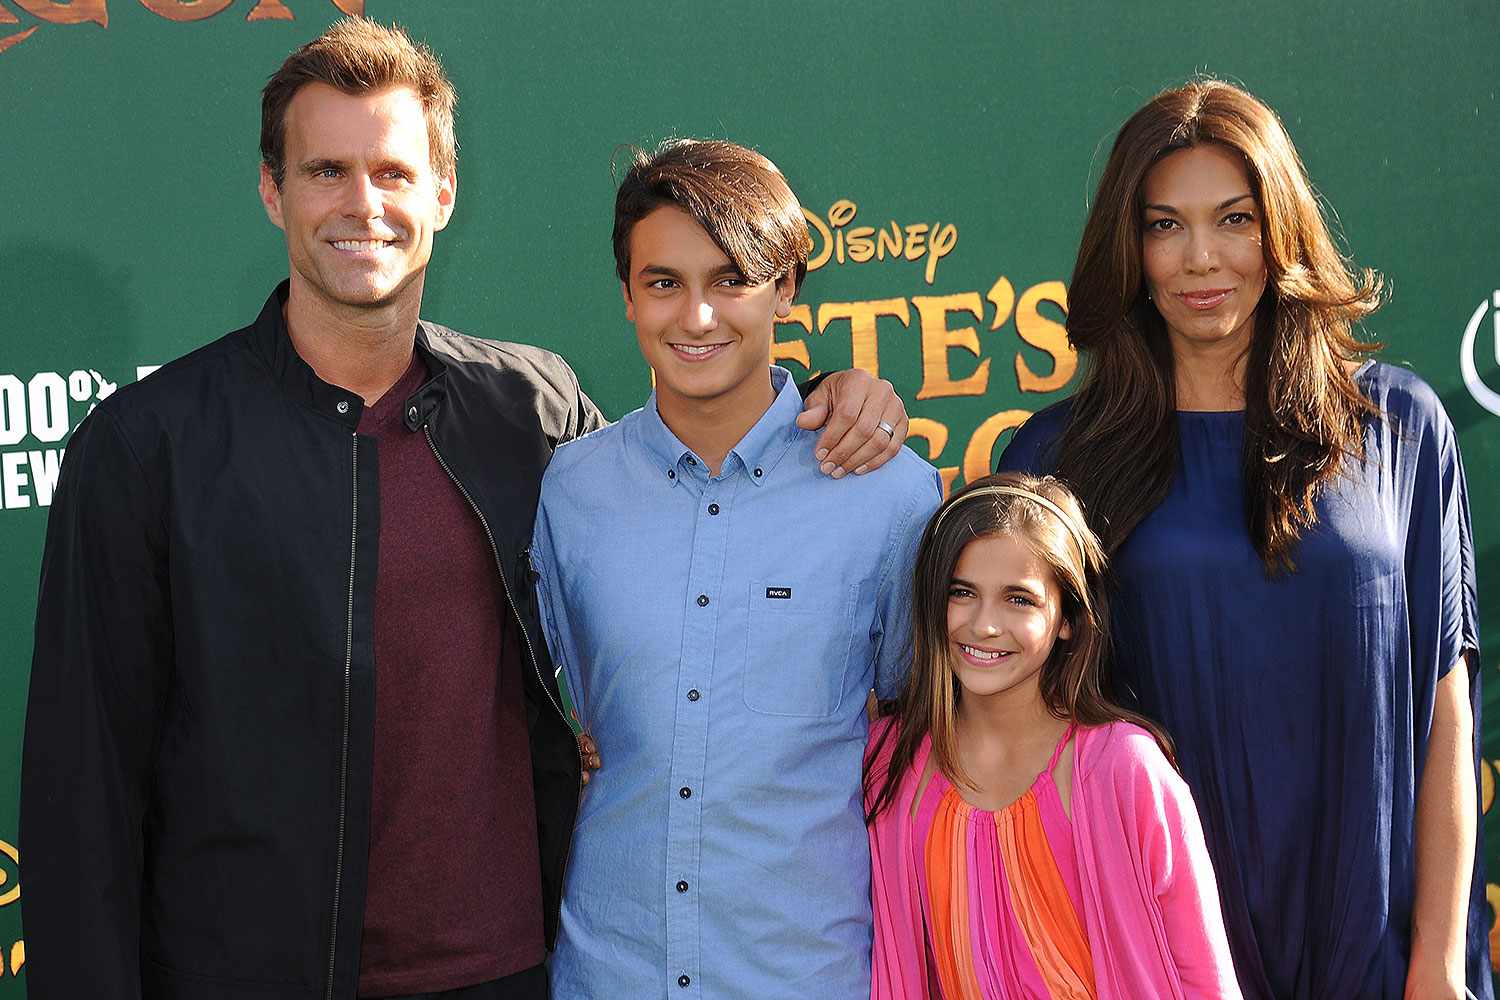 Actor Cameron Mathison, wife Vanessa Arevalo, son Lucas Arthur Mathison and daughter Leila Mathison attend the premiere of Disney's "Pete's Dragon" held at the El Capitan Theater on August 8, 2016 in Hollywood, California.